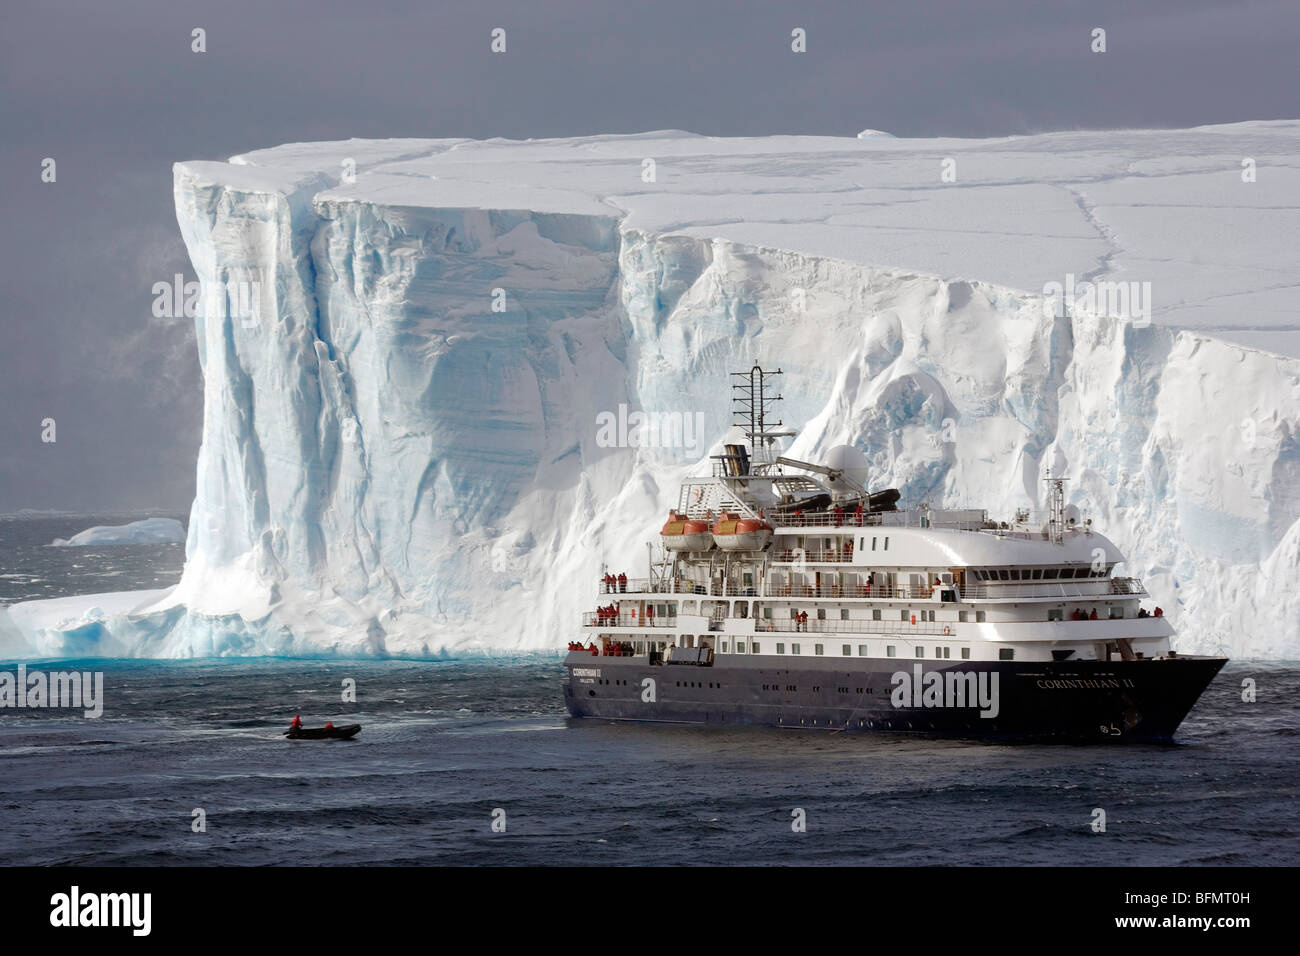 Antarctica, Antarctic Sound and Hope Bay, expedition ship the Corinthian III is dwarfed by the tabular icebergs. Stock Photo